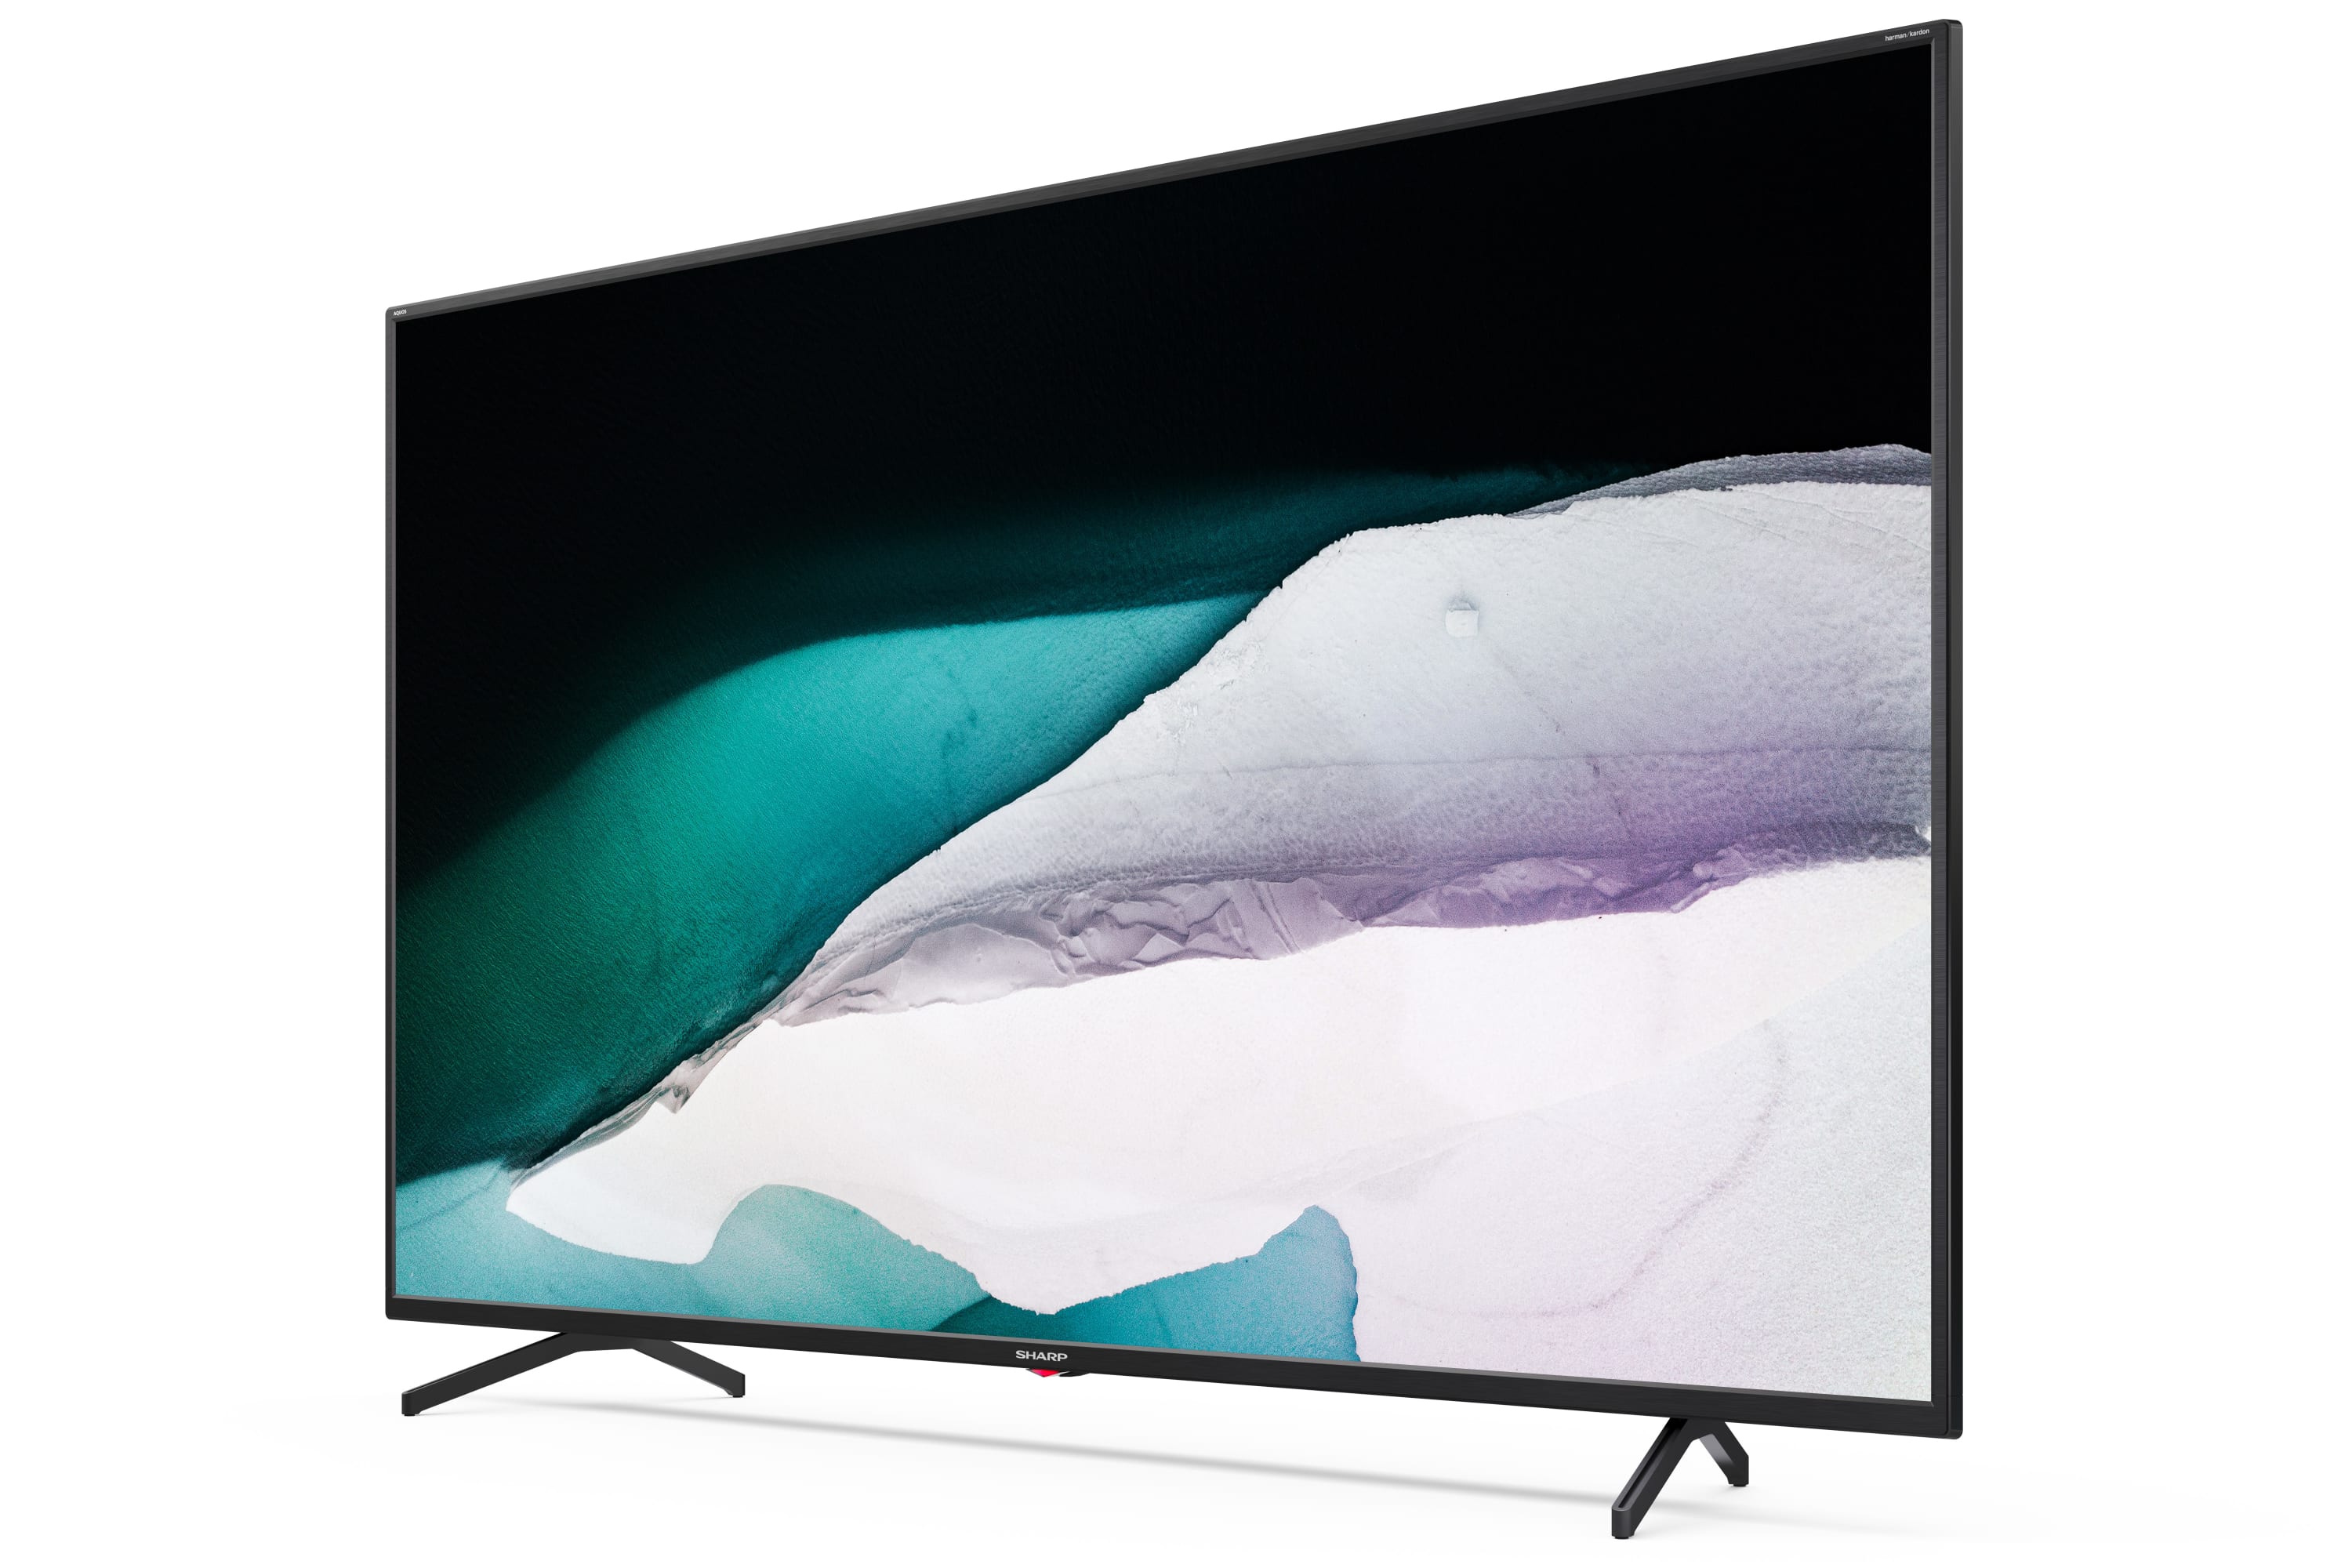 Android TV 4K UHD - ANDROID TV™ 4K ULTRA HD de 65 pol.